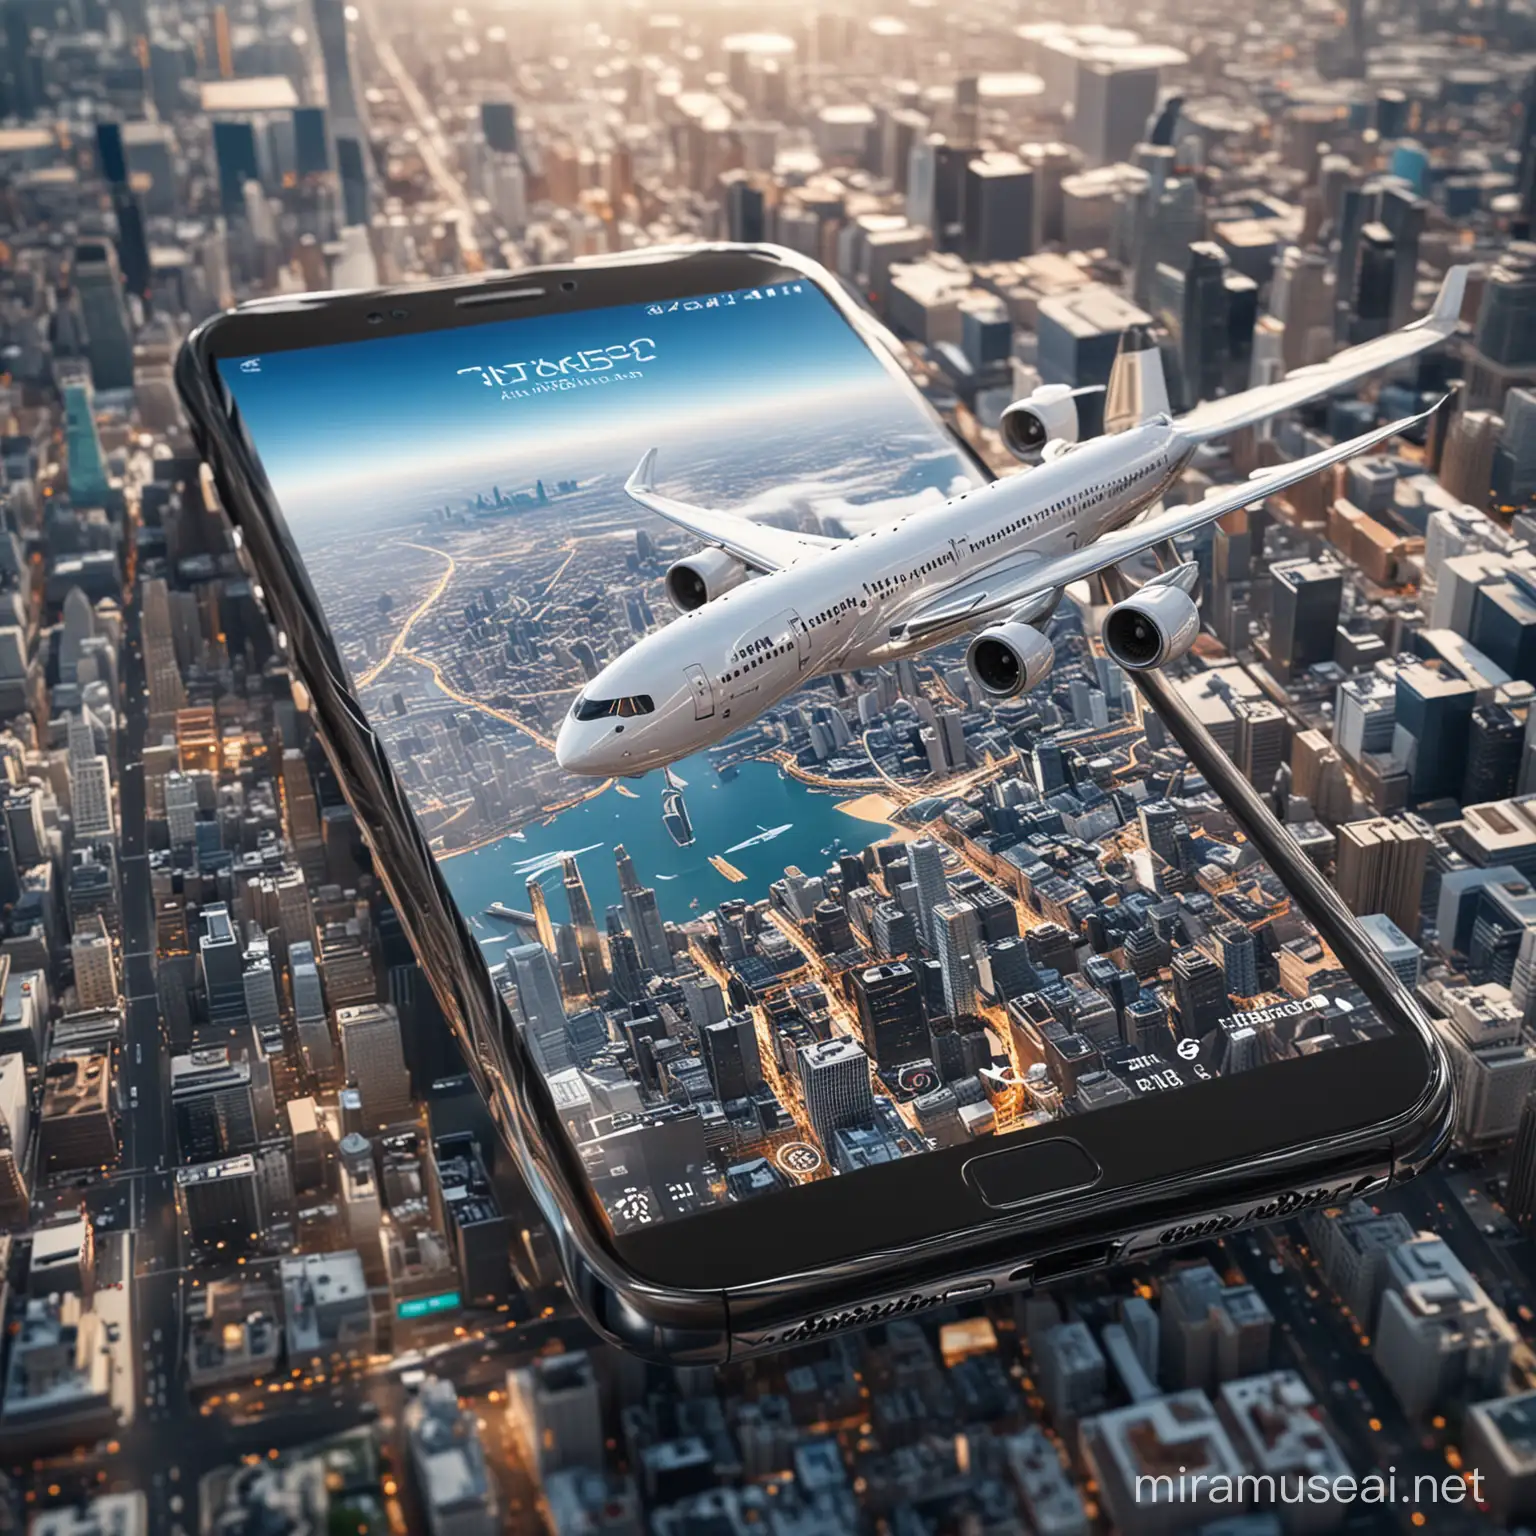 An artistic rendering where a modern smartphone is merging with an airliner. The smartphone's screen should display a cityscape with tall skyscrapers, suggesting an app for travel or an augmented reality view. The aircraft should be partially transformed into the body of the smartphone, symbolizing the fusion of technology and air travel. The style should be dreamlike and abstract, with a soft glow around the objects to emphasize their hybrid nature. The overall feel should convey innovation, the blend of digital and physical, and a seamless travel experience, , 32k render, hyperrealistic, detailled.